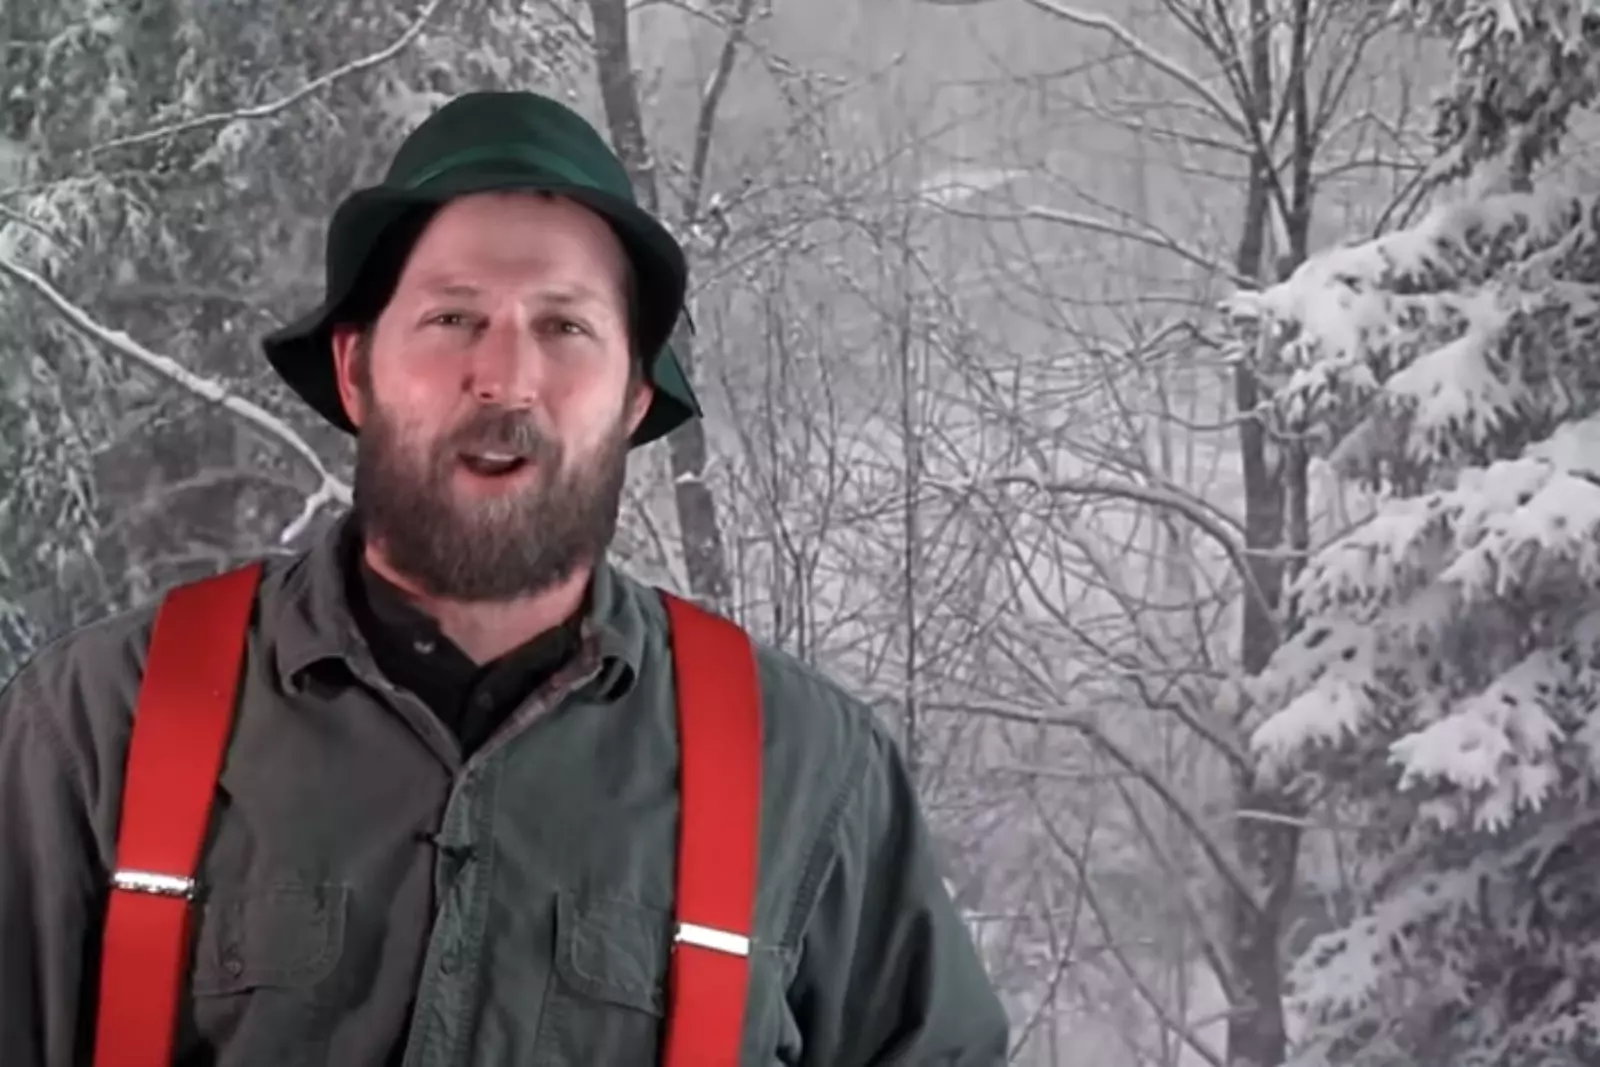 Latest on the Monster Storm from The Hillbilly Weatherman [NSFW]